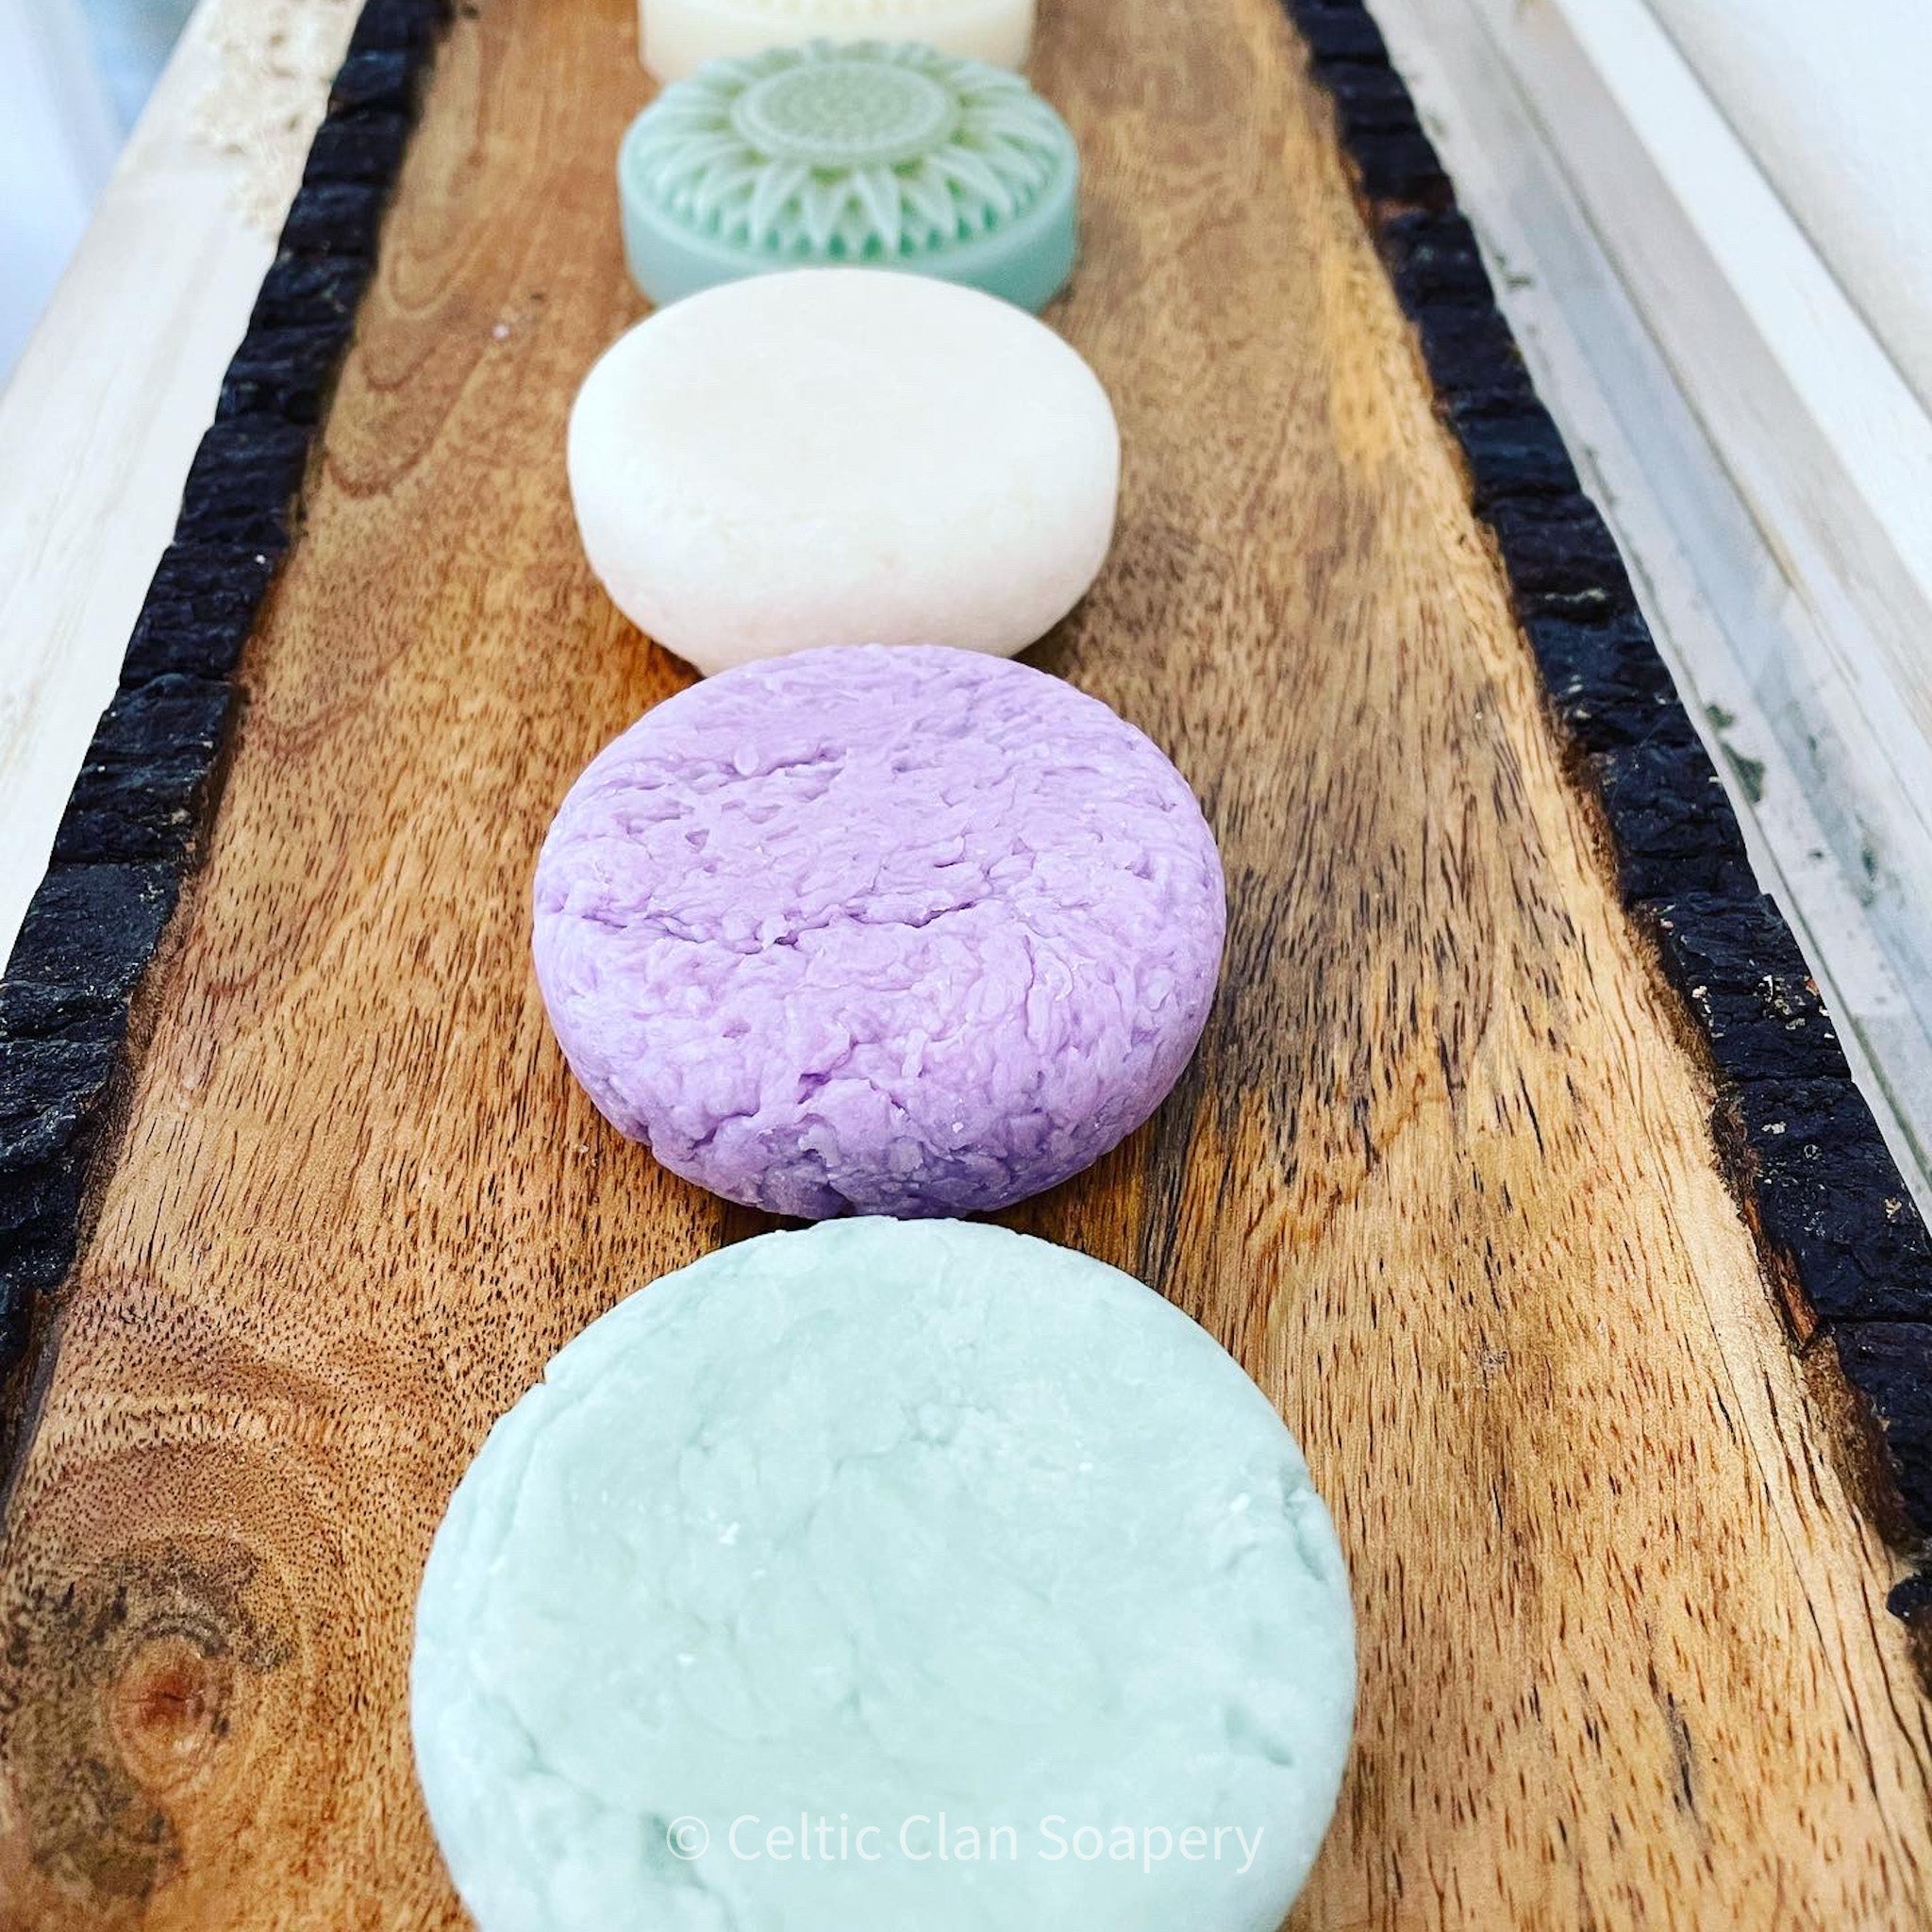 Celtic Clan Soapery sulfate free shampoo bars assorted scents with essential oils